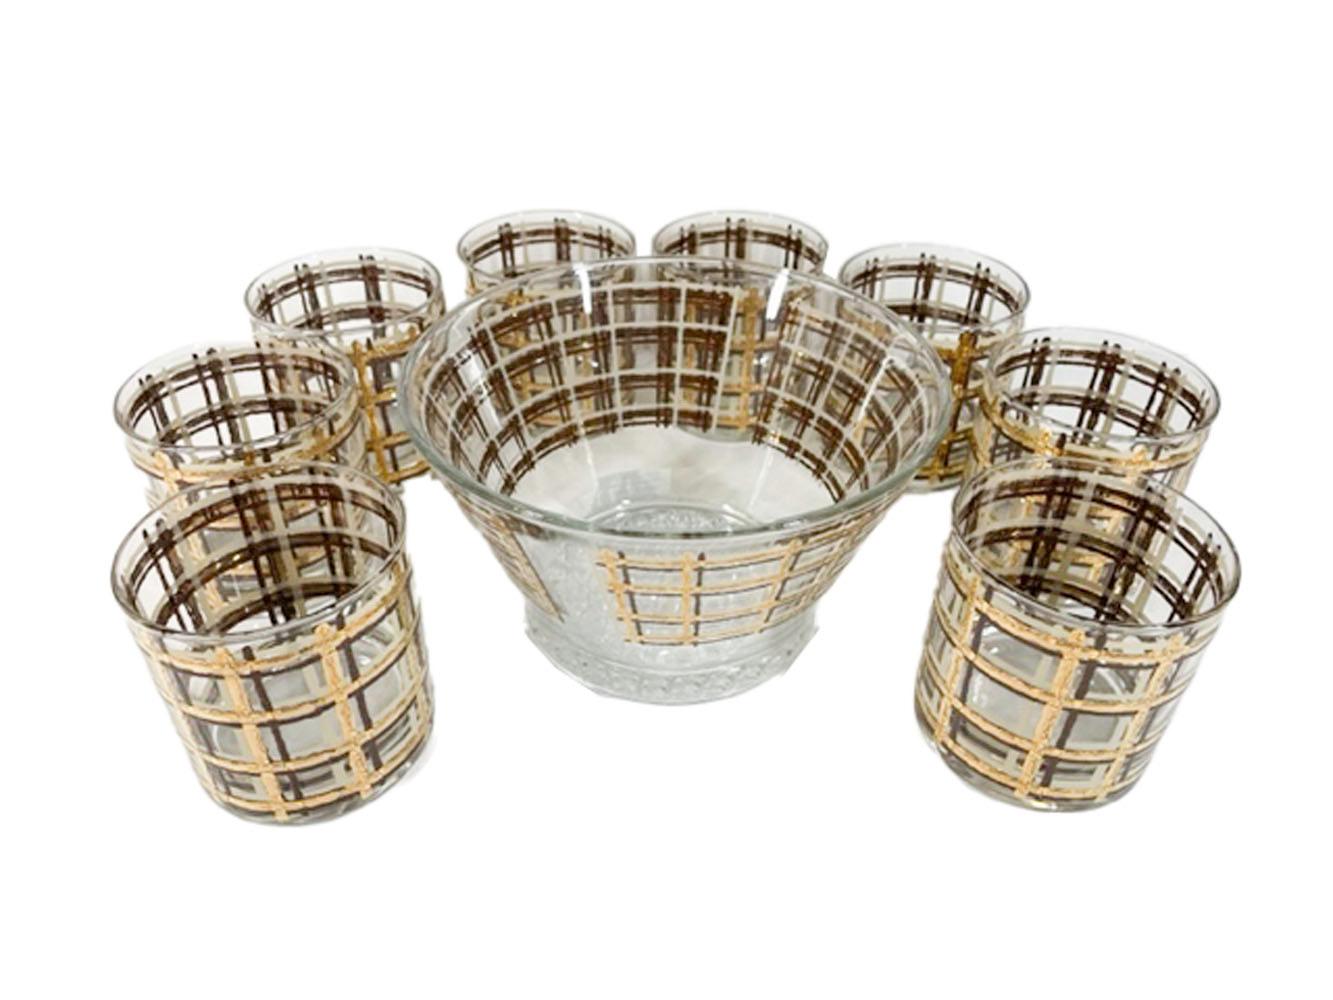 17 Piece Mid-Century Modern barware set consisting of an ice bowl with flared sides and lattice molded foot, 8 highball glasses and 8 rocks glasses. Each piece decorated with loose wavey lines in cream and brown enamel with 22 karat gold in a plaid